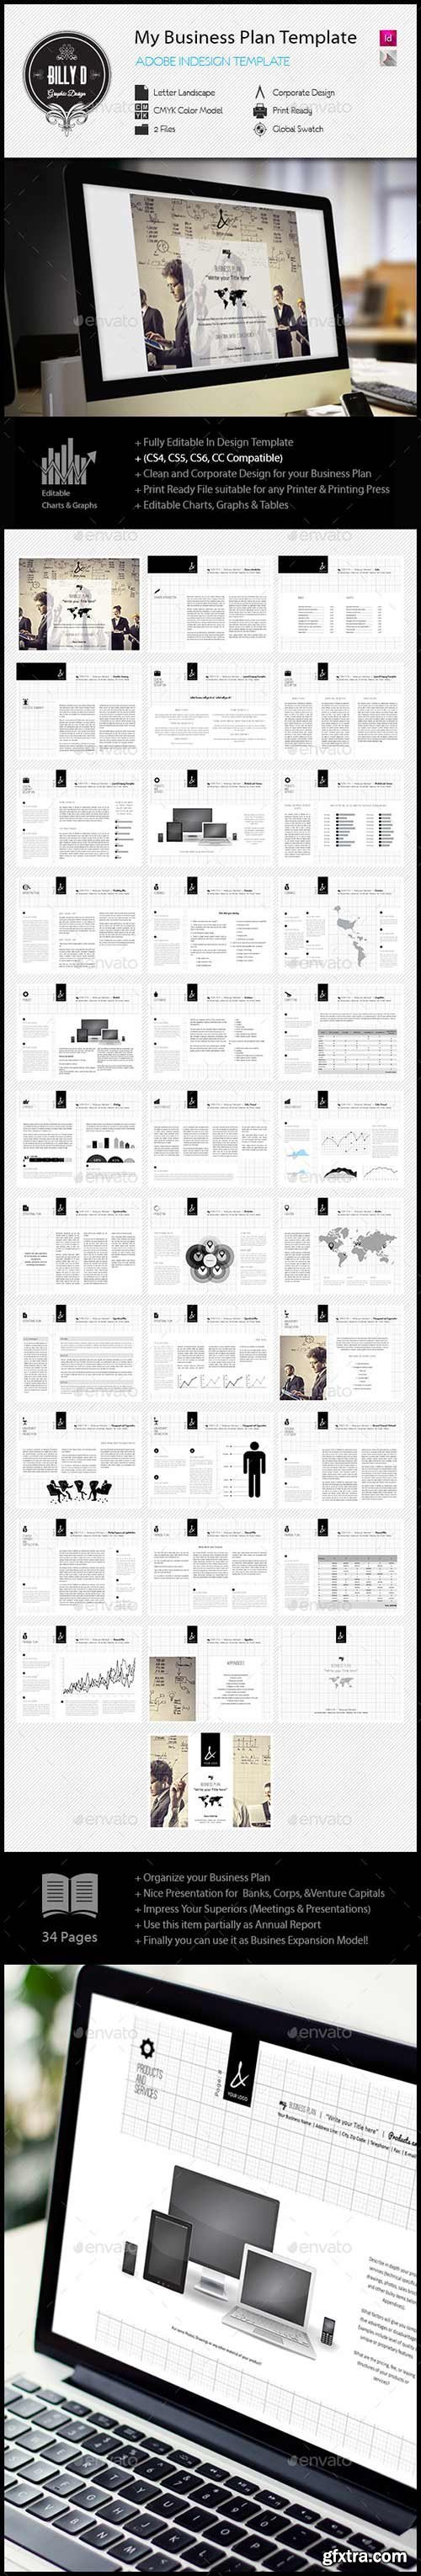 GraphicRiver - My Business Plan Digital Template 11912227